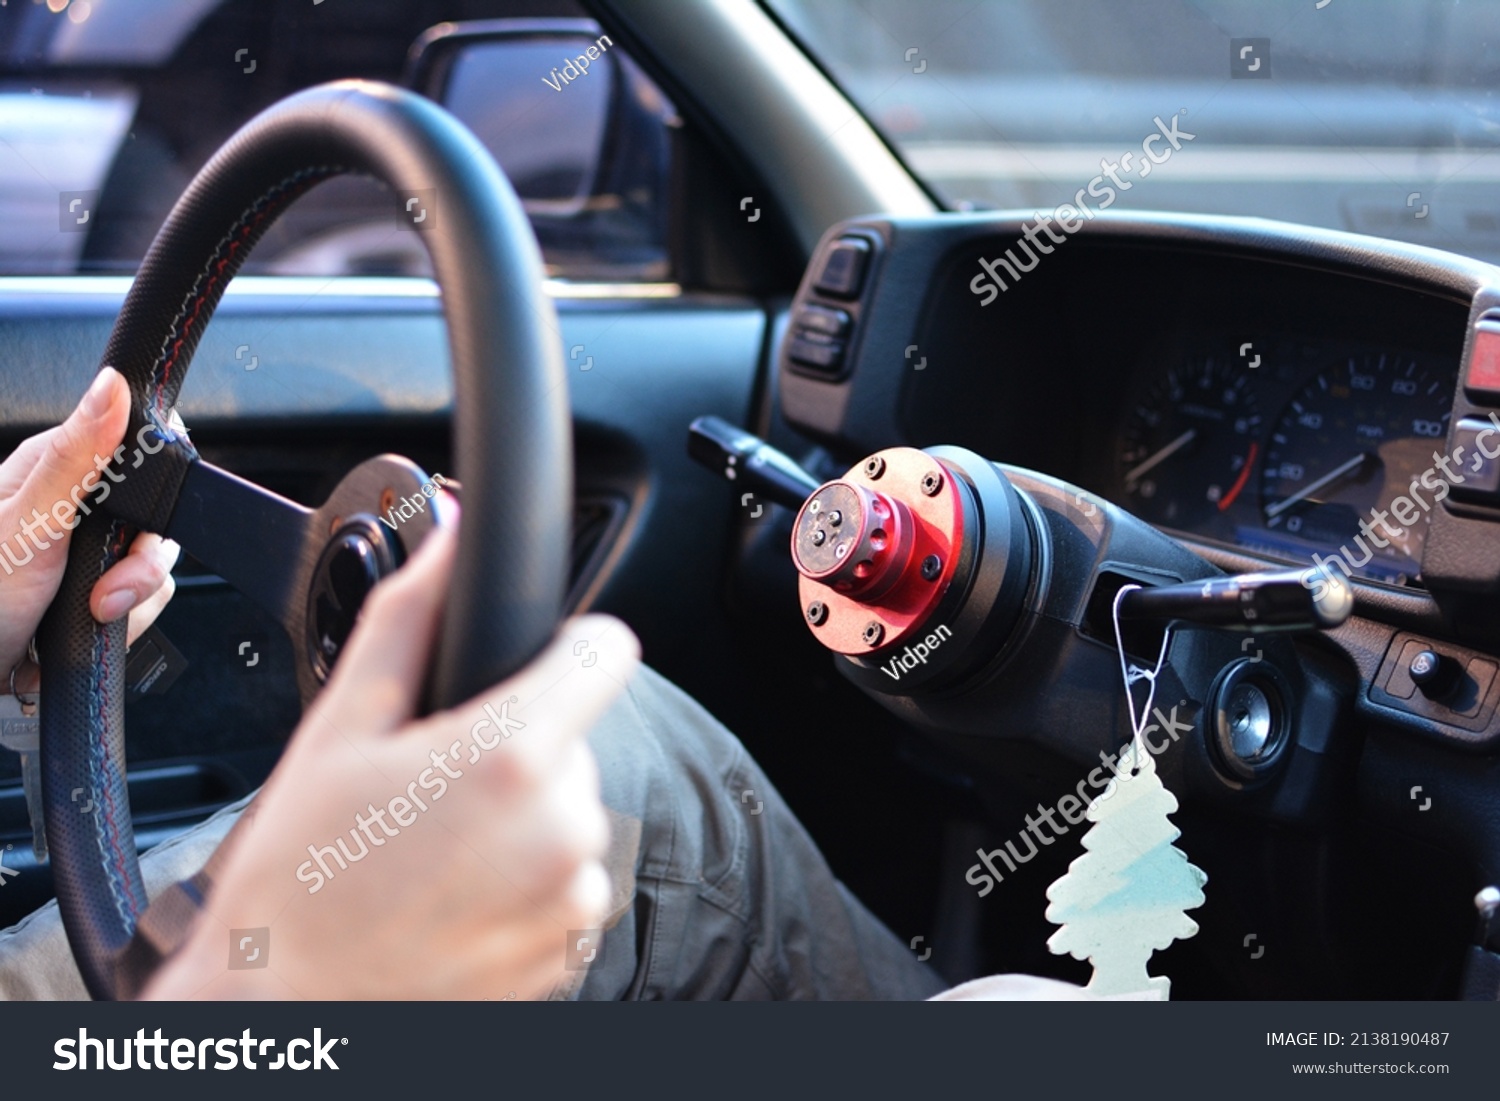 Person removing steering wheel from stock to protect car from theft. Close up with hands holding steering wheel detached from steering column in older car to prevent crime #2138190487